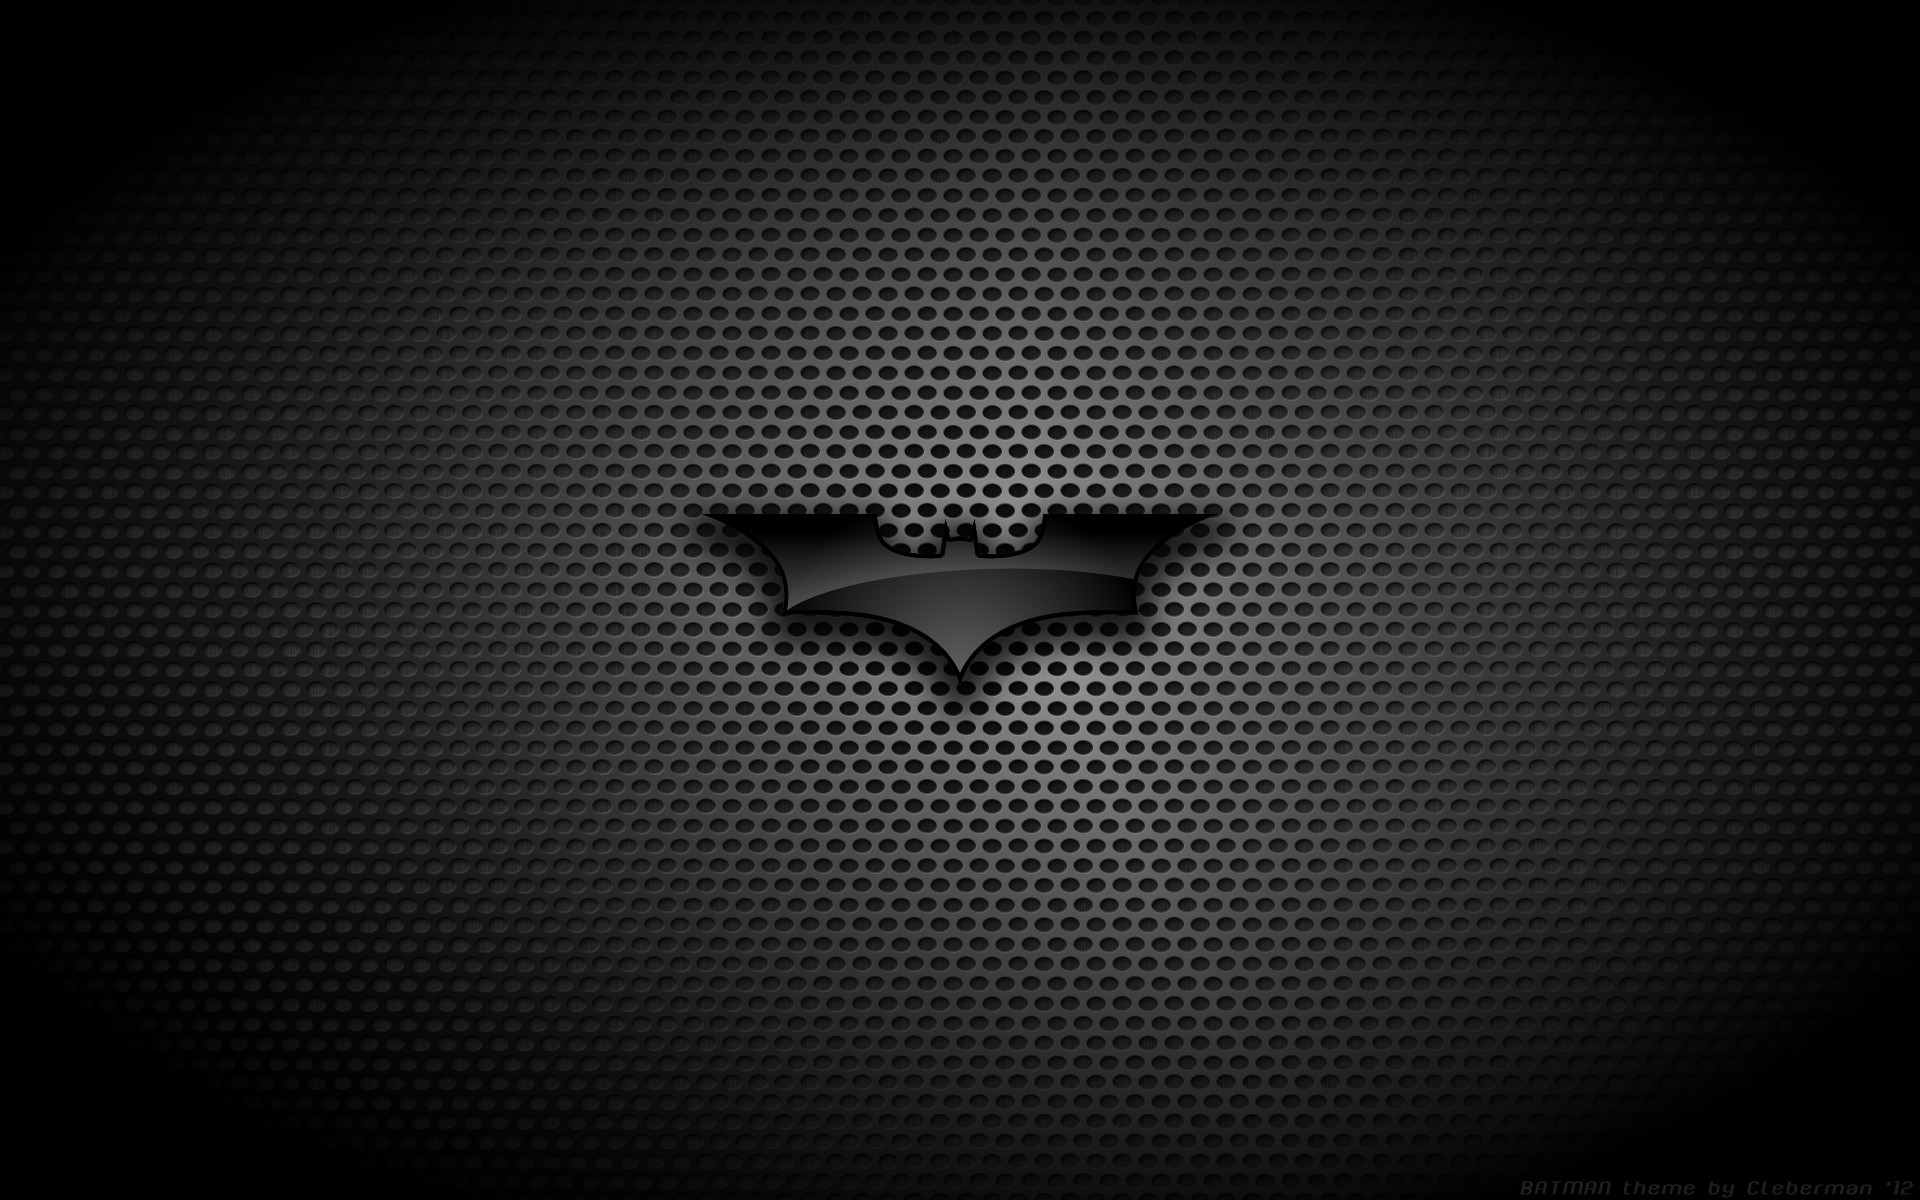 Batman logo wallpapers wide with high resolution desktop wallpaper on movies category similar with arkham knight beyond comic iphone joker logo superman the